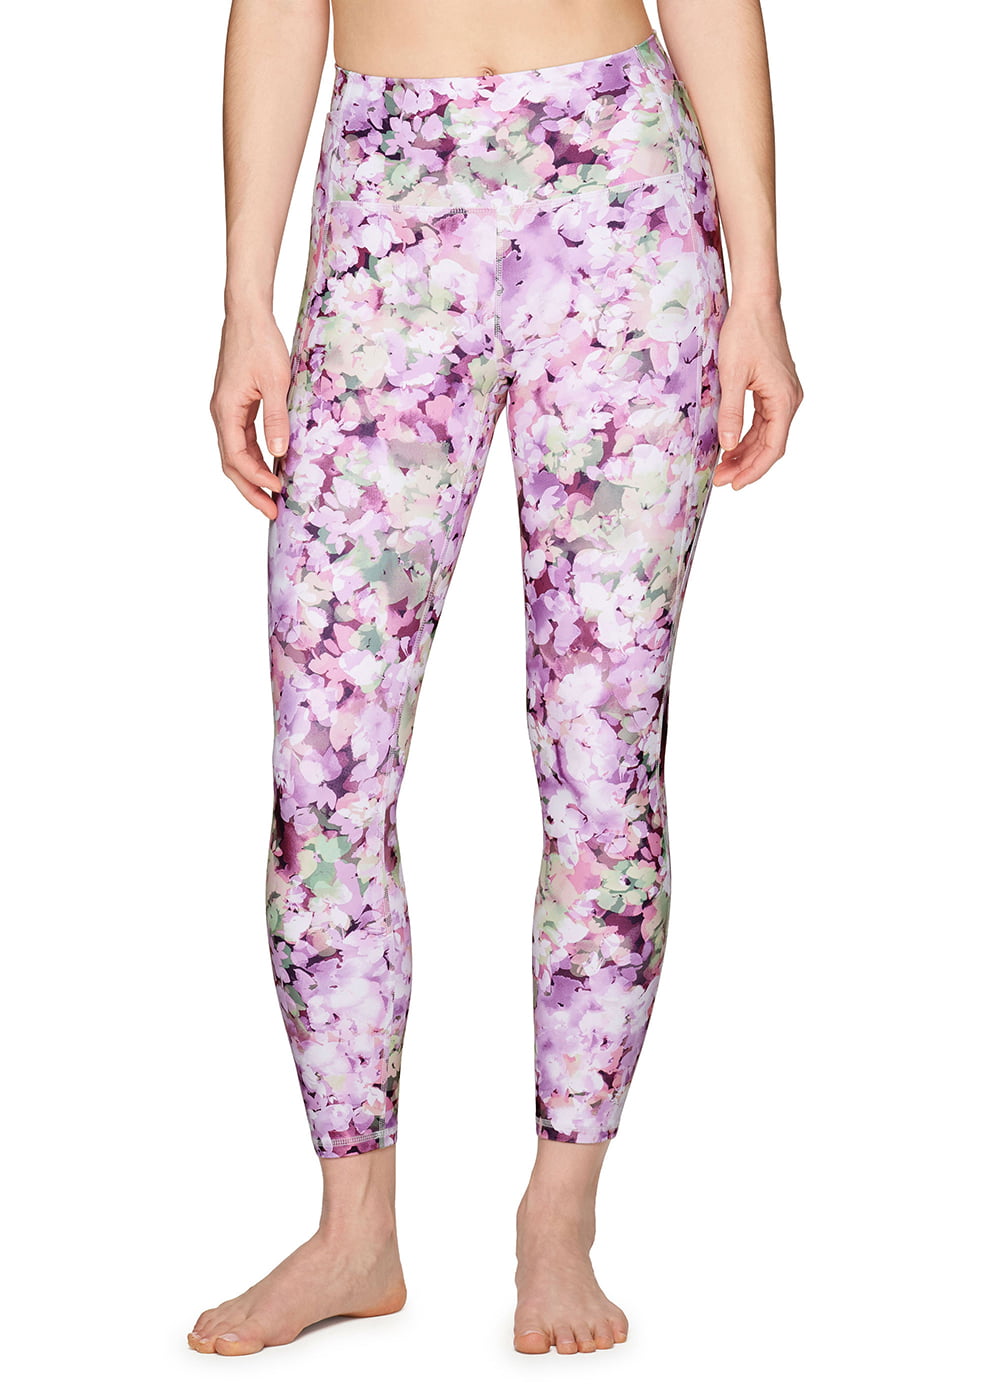 Rbx Active RBX Workout Leggings Multi Size M - $10 (68% Off Retail) - From  Hailey